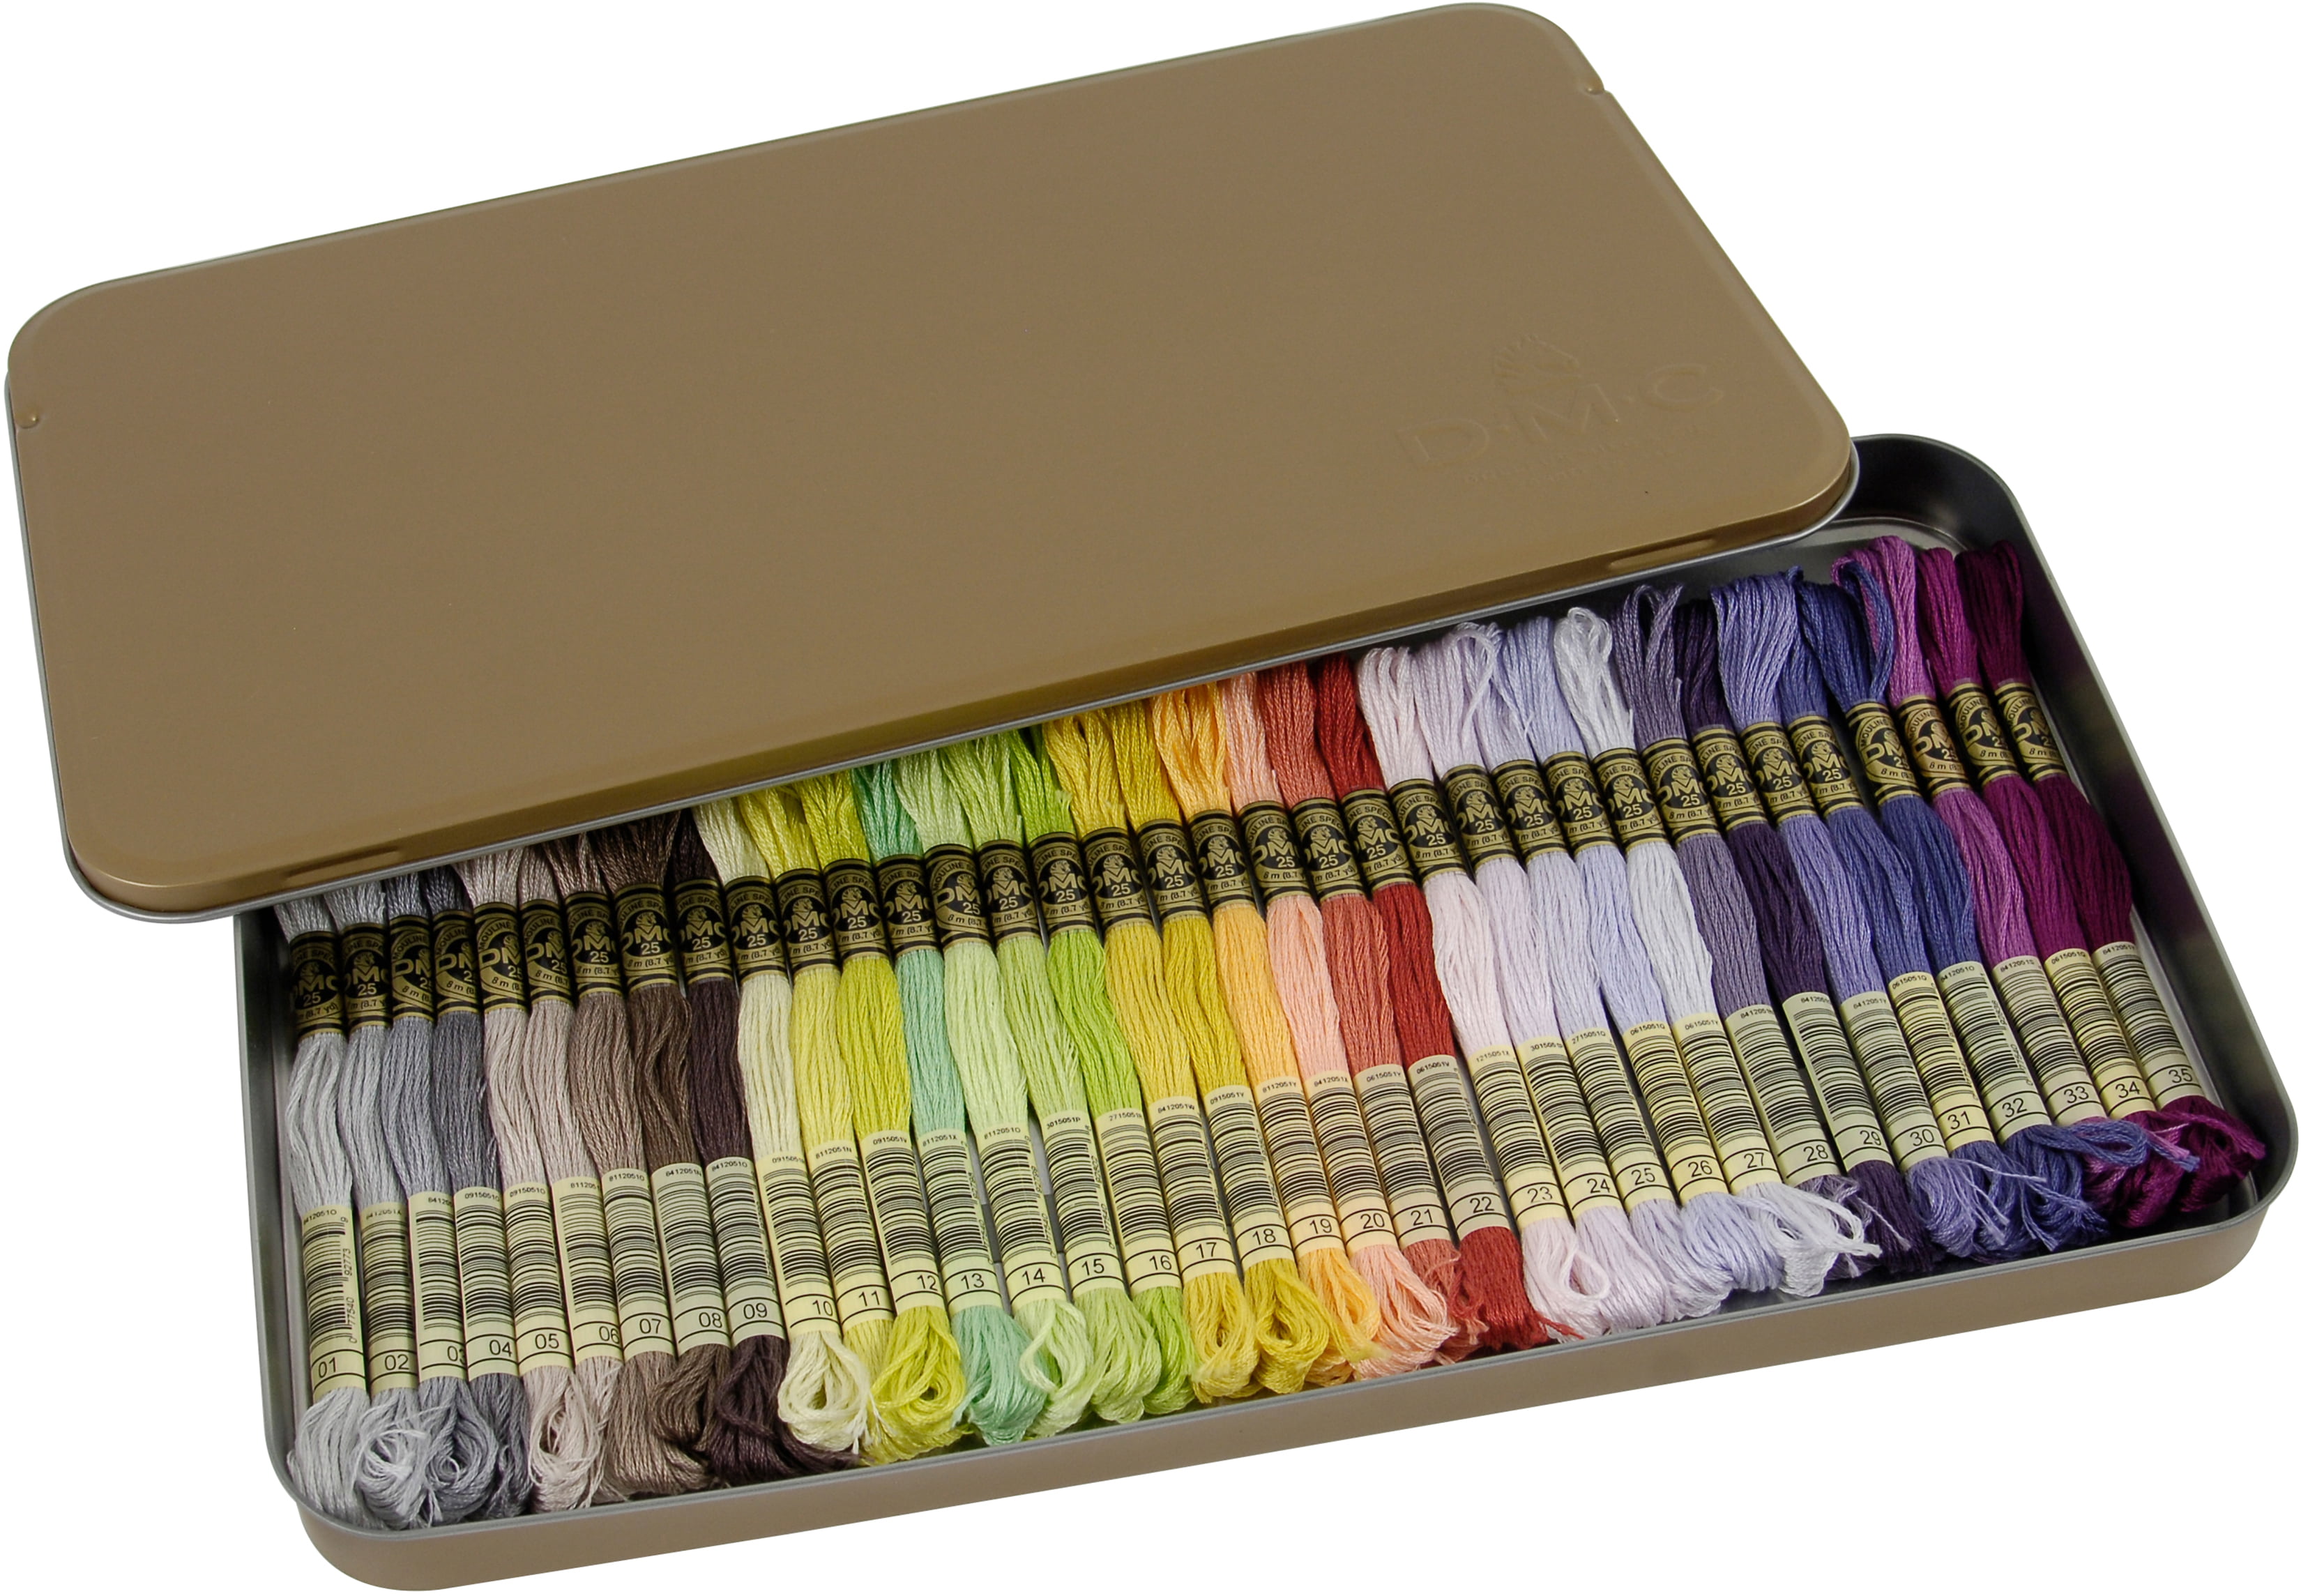 Charming Melodie dmc embroidery floss pack,35 colors assortment with  collector tin,dmc embroidery thread kit bundle with dmc needle threader.